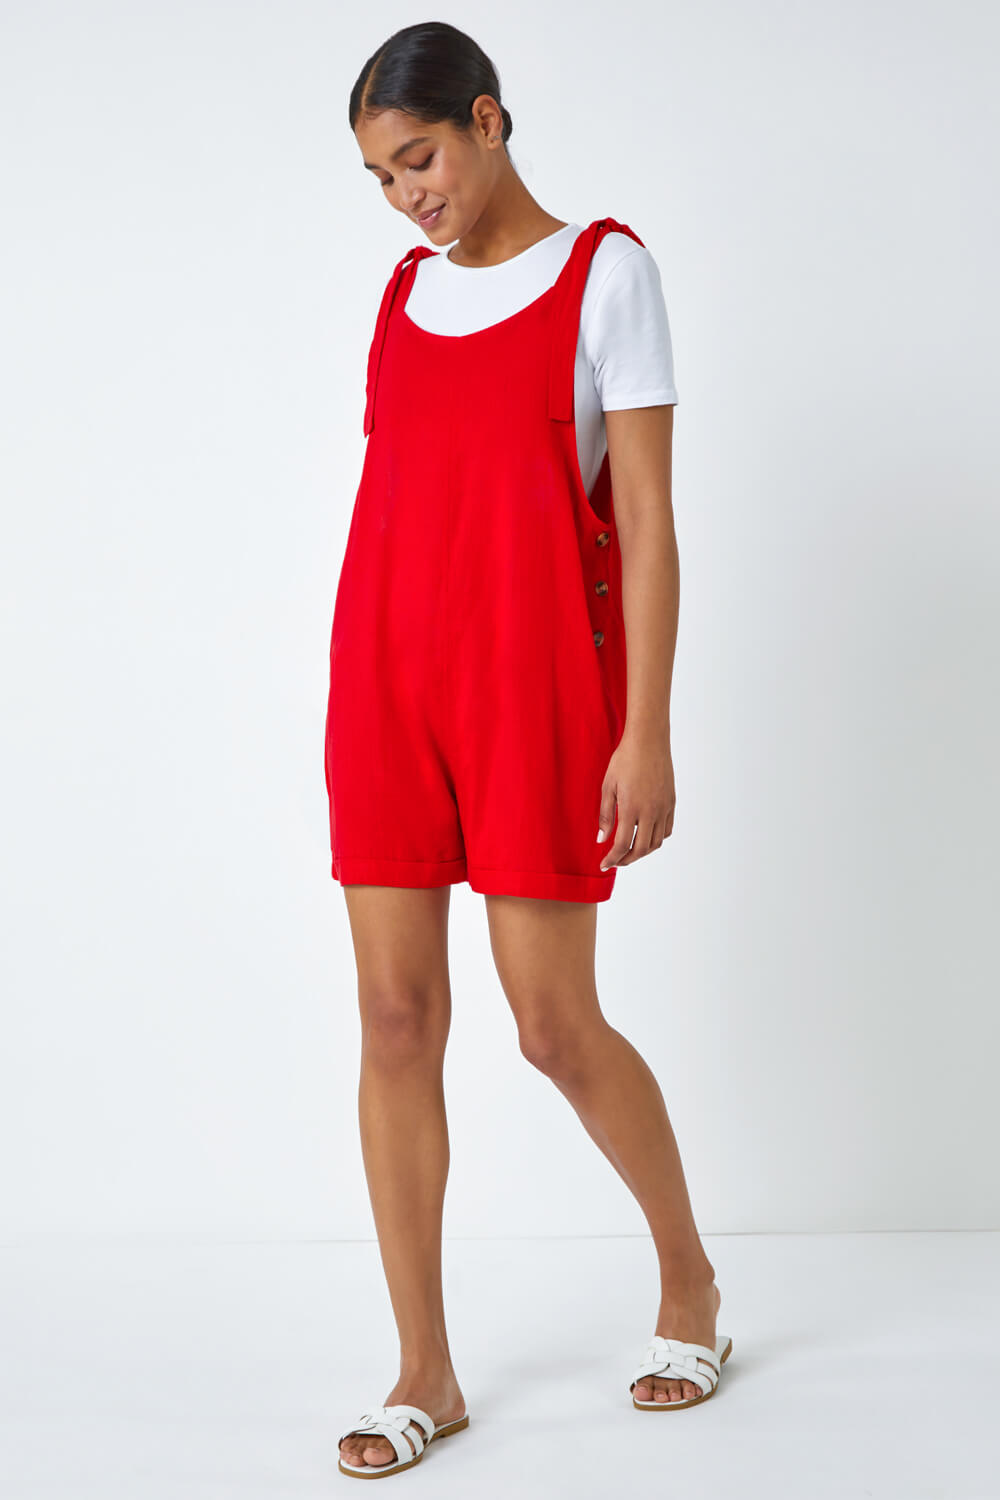 Red Shoulder Tie Cotton Playsuit, Image 3 of 5